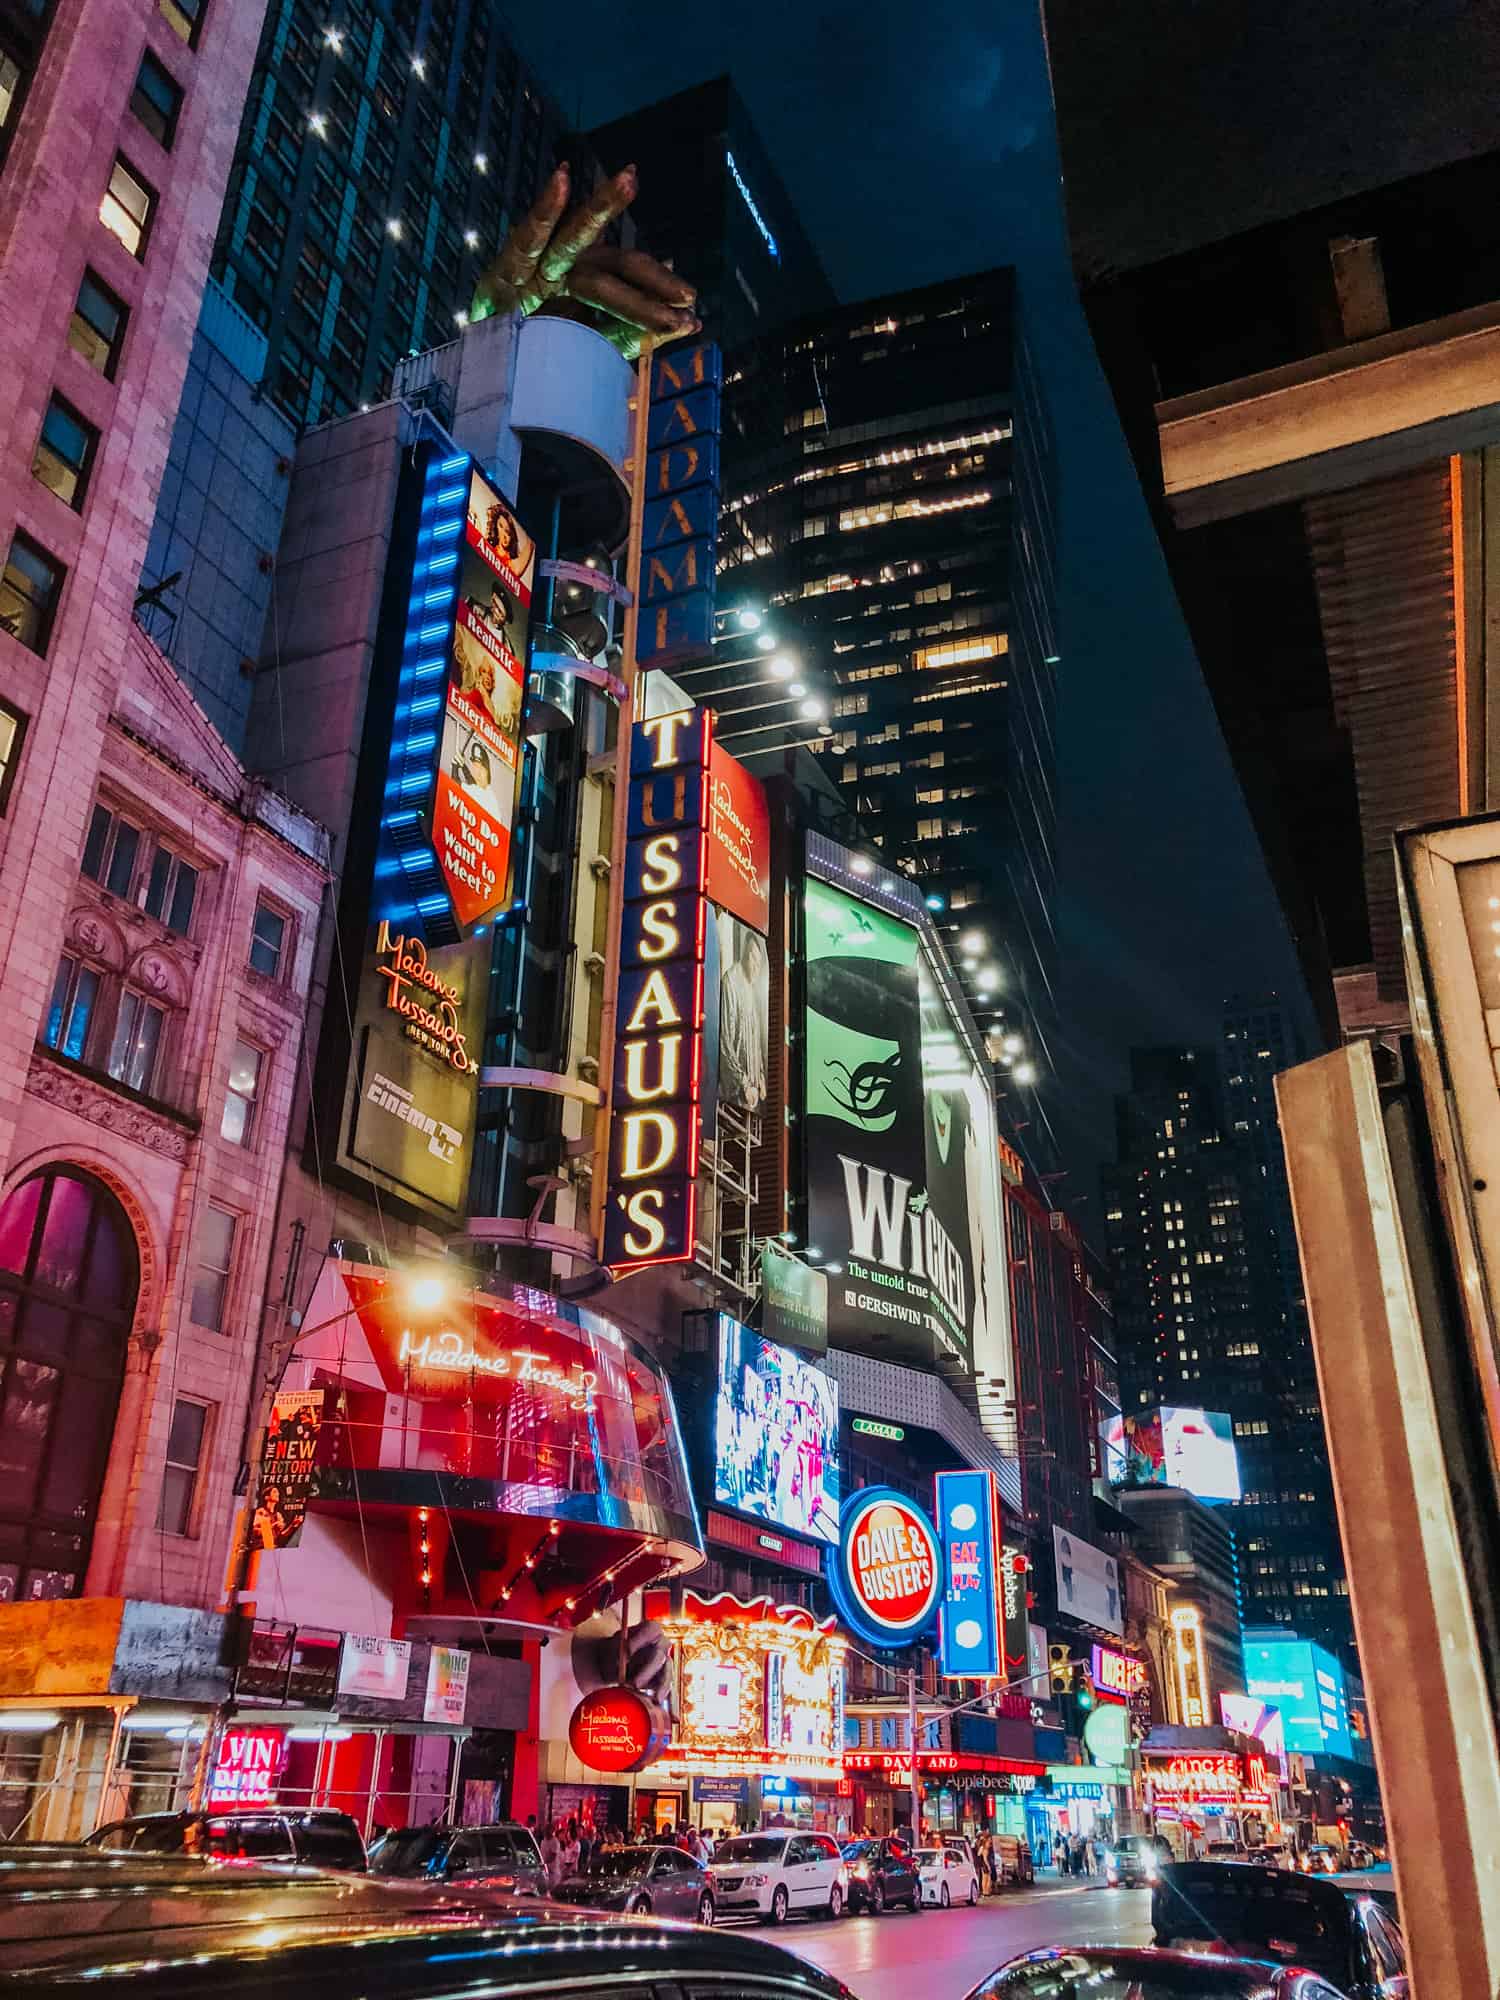 End your 4 days in New York by watching a Broadway show - Broadway at night